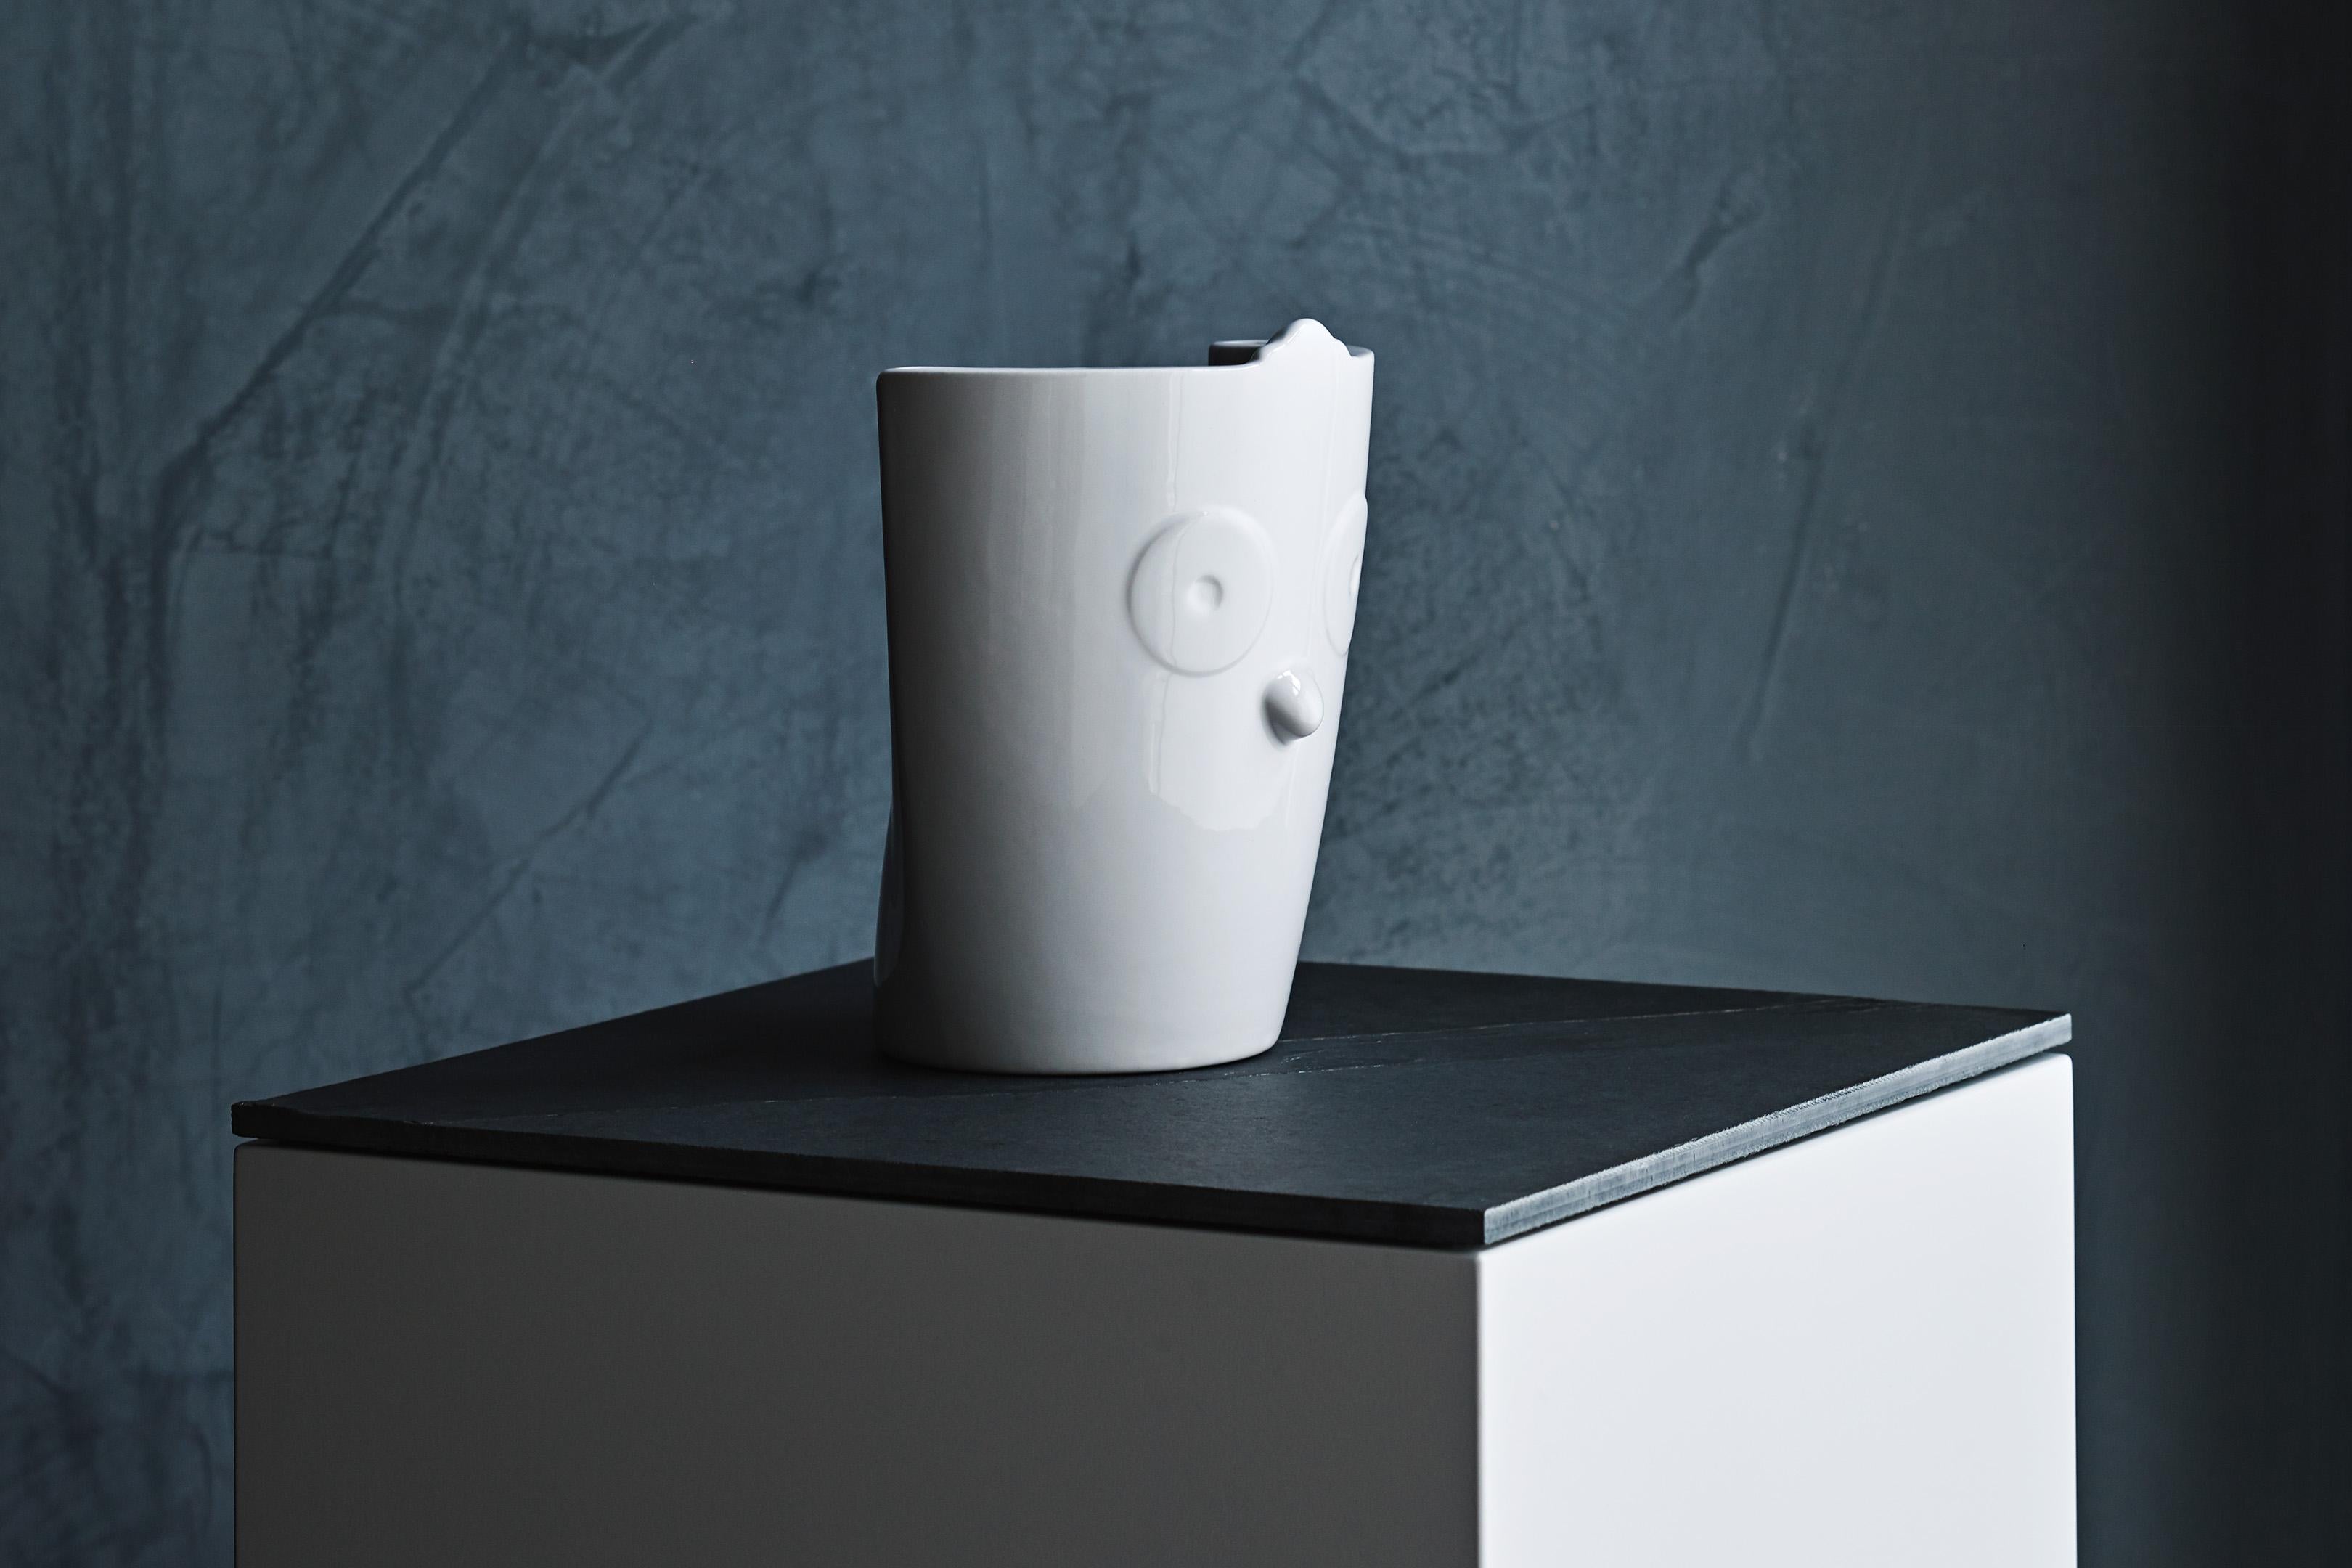 This ceramic table vase from SoShiro’s Ainu collection, a collaboration between award-winning artist Toru Kaizawa and Shiro Muchiri, has an organic incorporated handle for an easy grip. The playful shape of this minimal decorative object can inspire